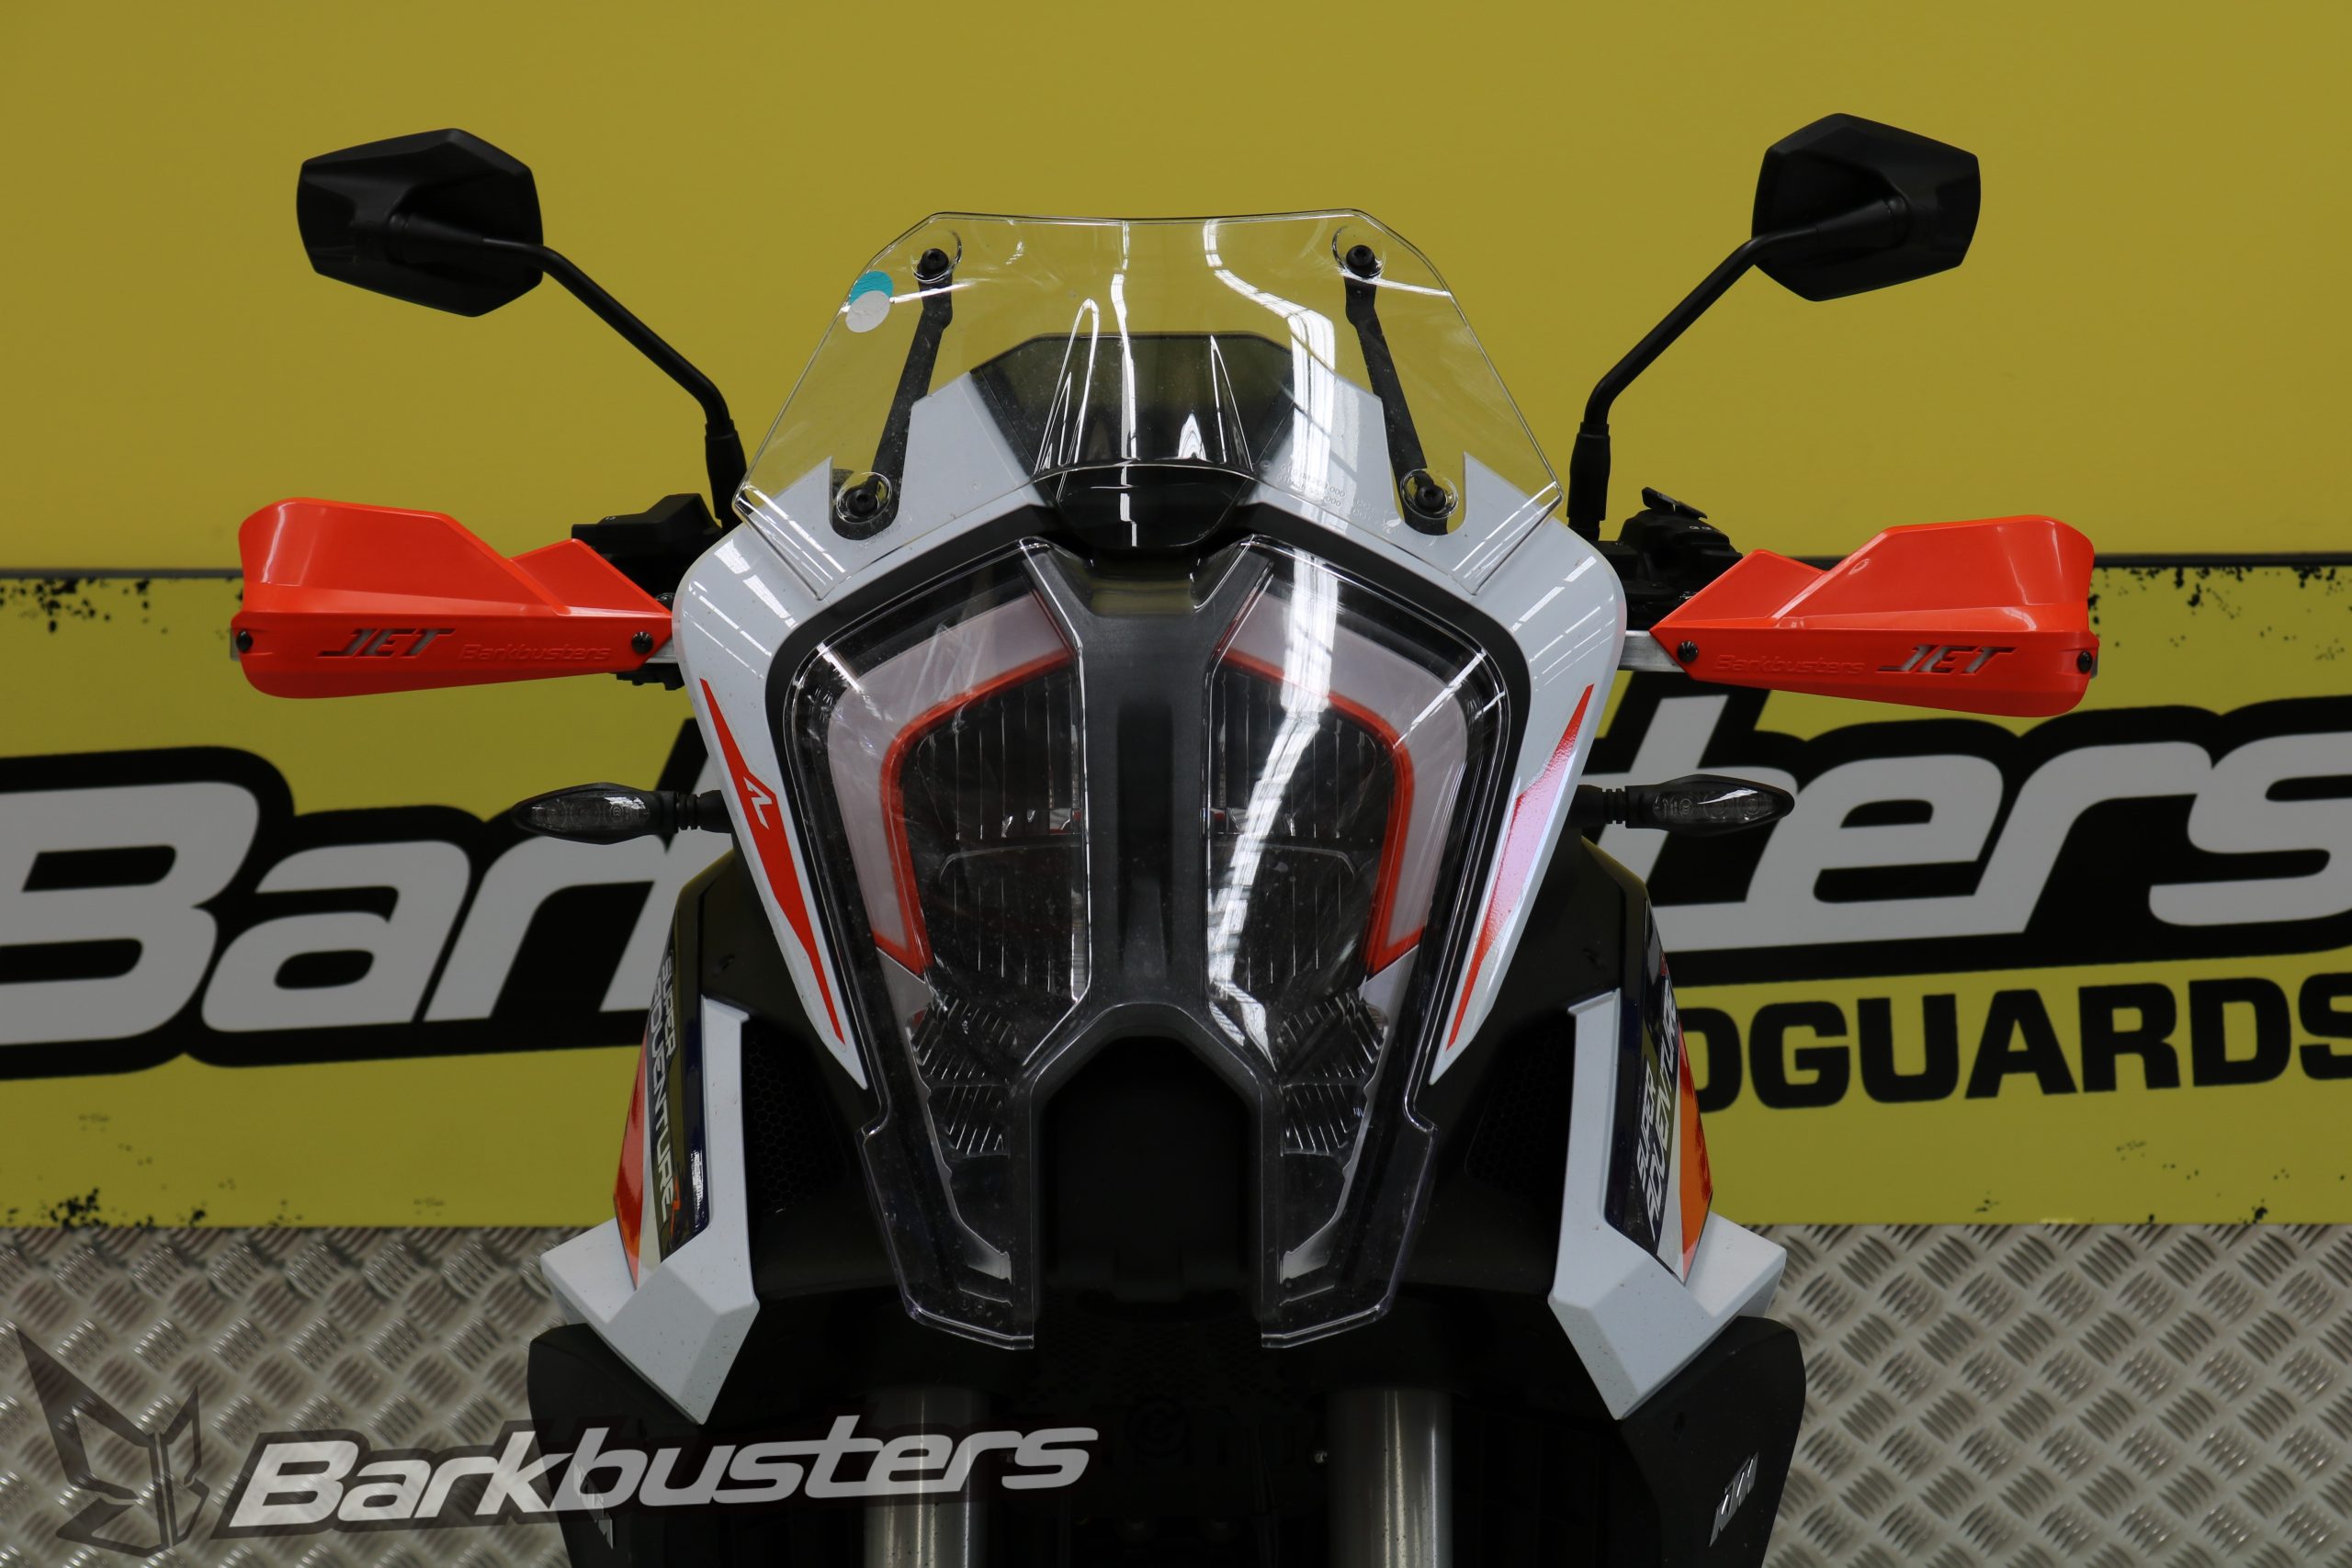 BARKBUSTERS Handguard Hardware Kit (Code: BHG-107-00) fitted to KTM SUPER ADVENTURE R with JET Guards